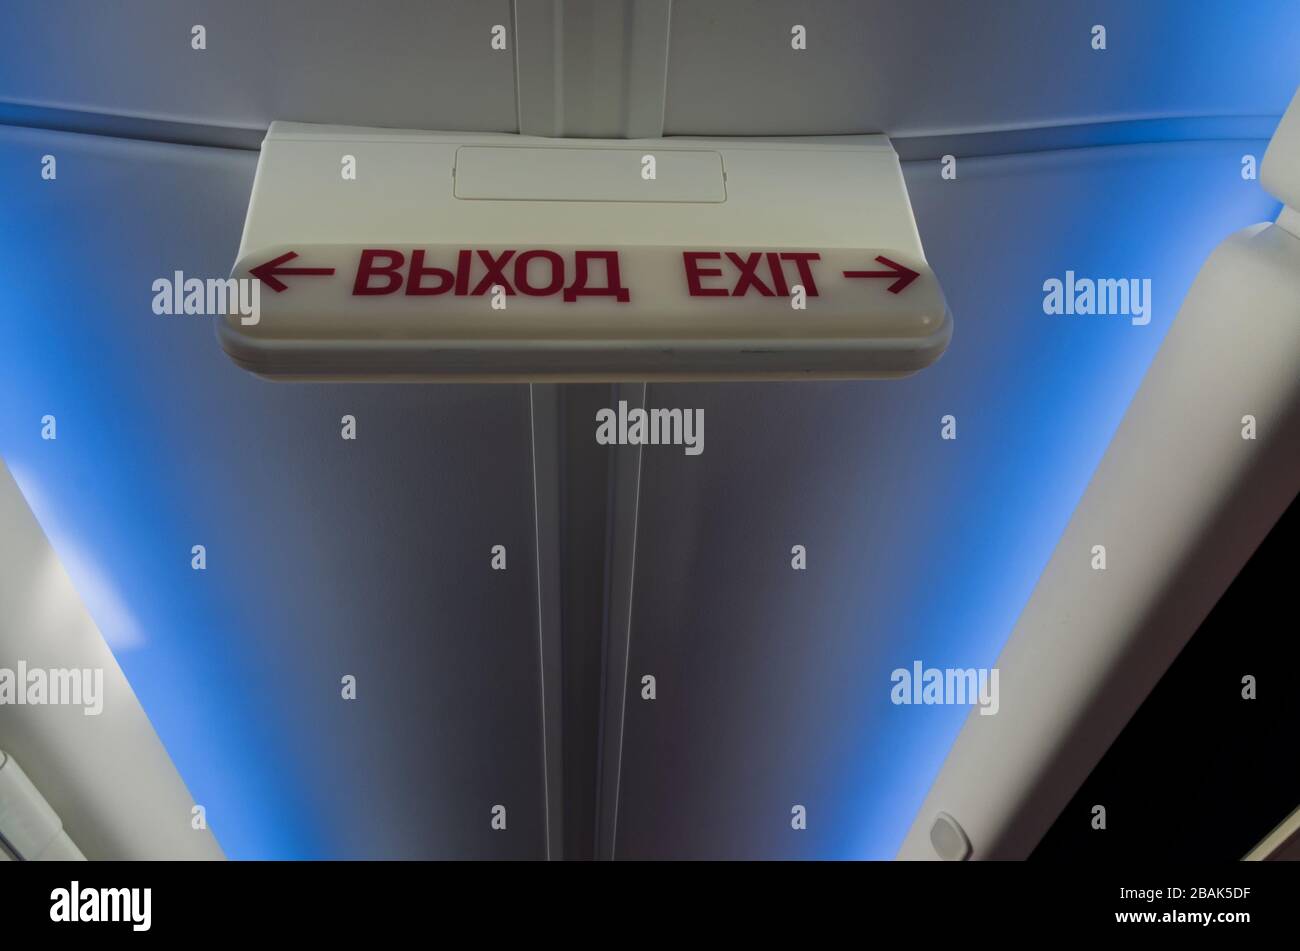 Information luminous sign 'exit' in Russian and English in the plane on the background of the ceiling with a blue light Stock Photo